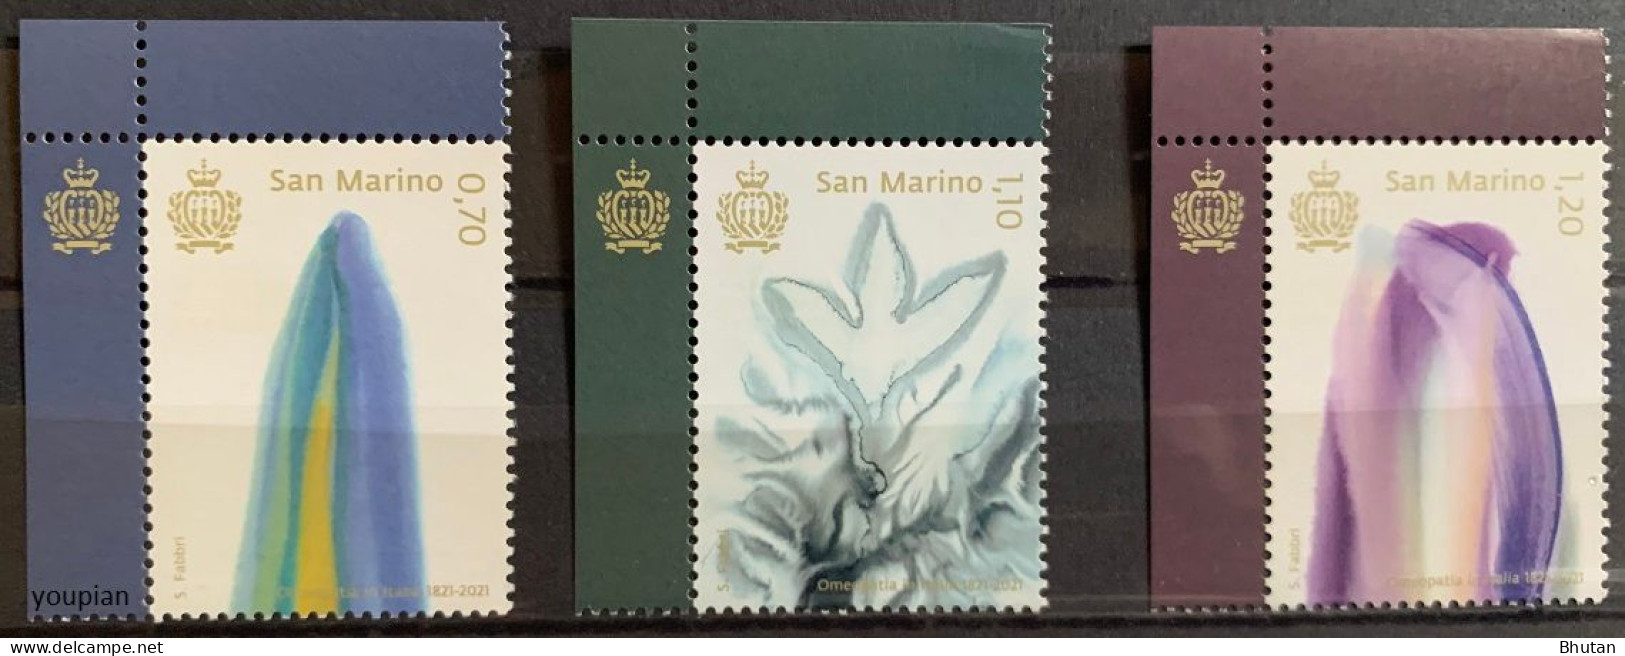 San Marino 2021, Bicentenary Of Homeopathy In Italy, MNH Stamps Set - Unused Stamps